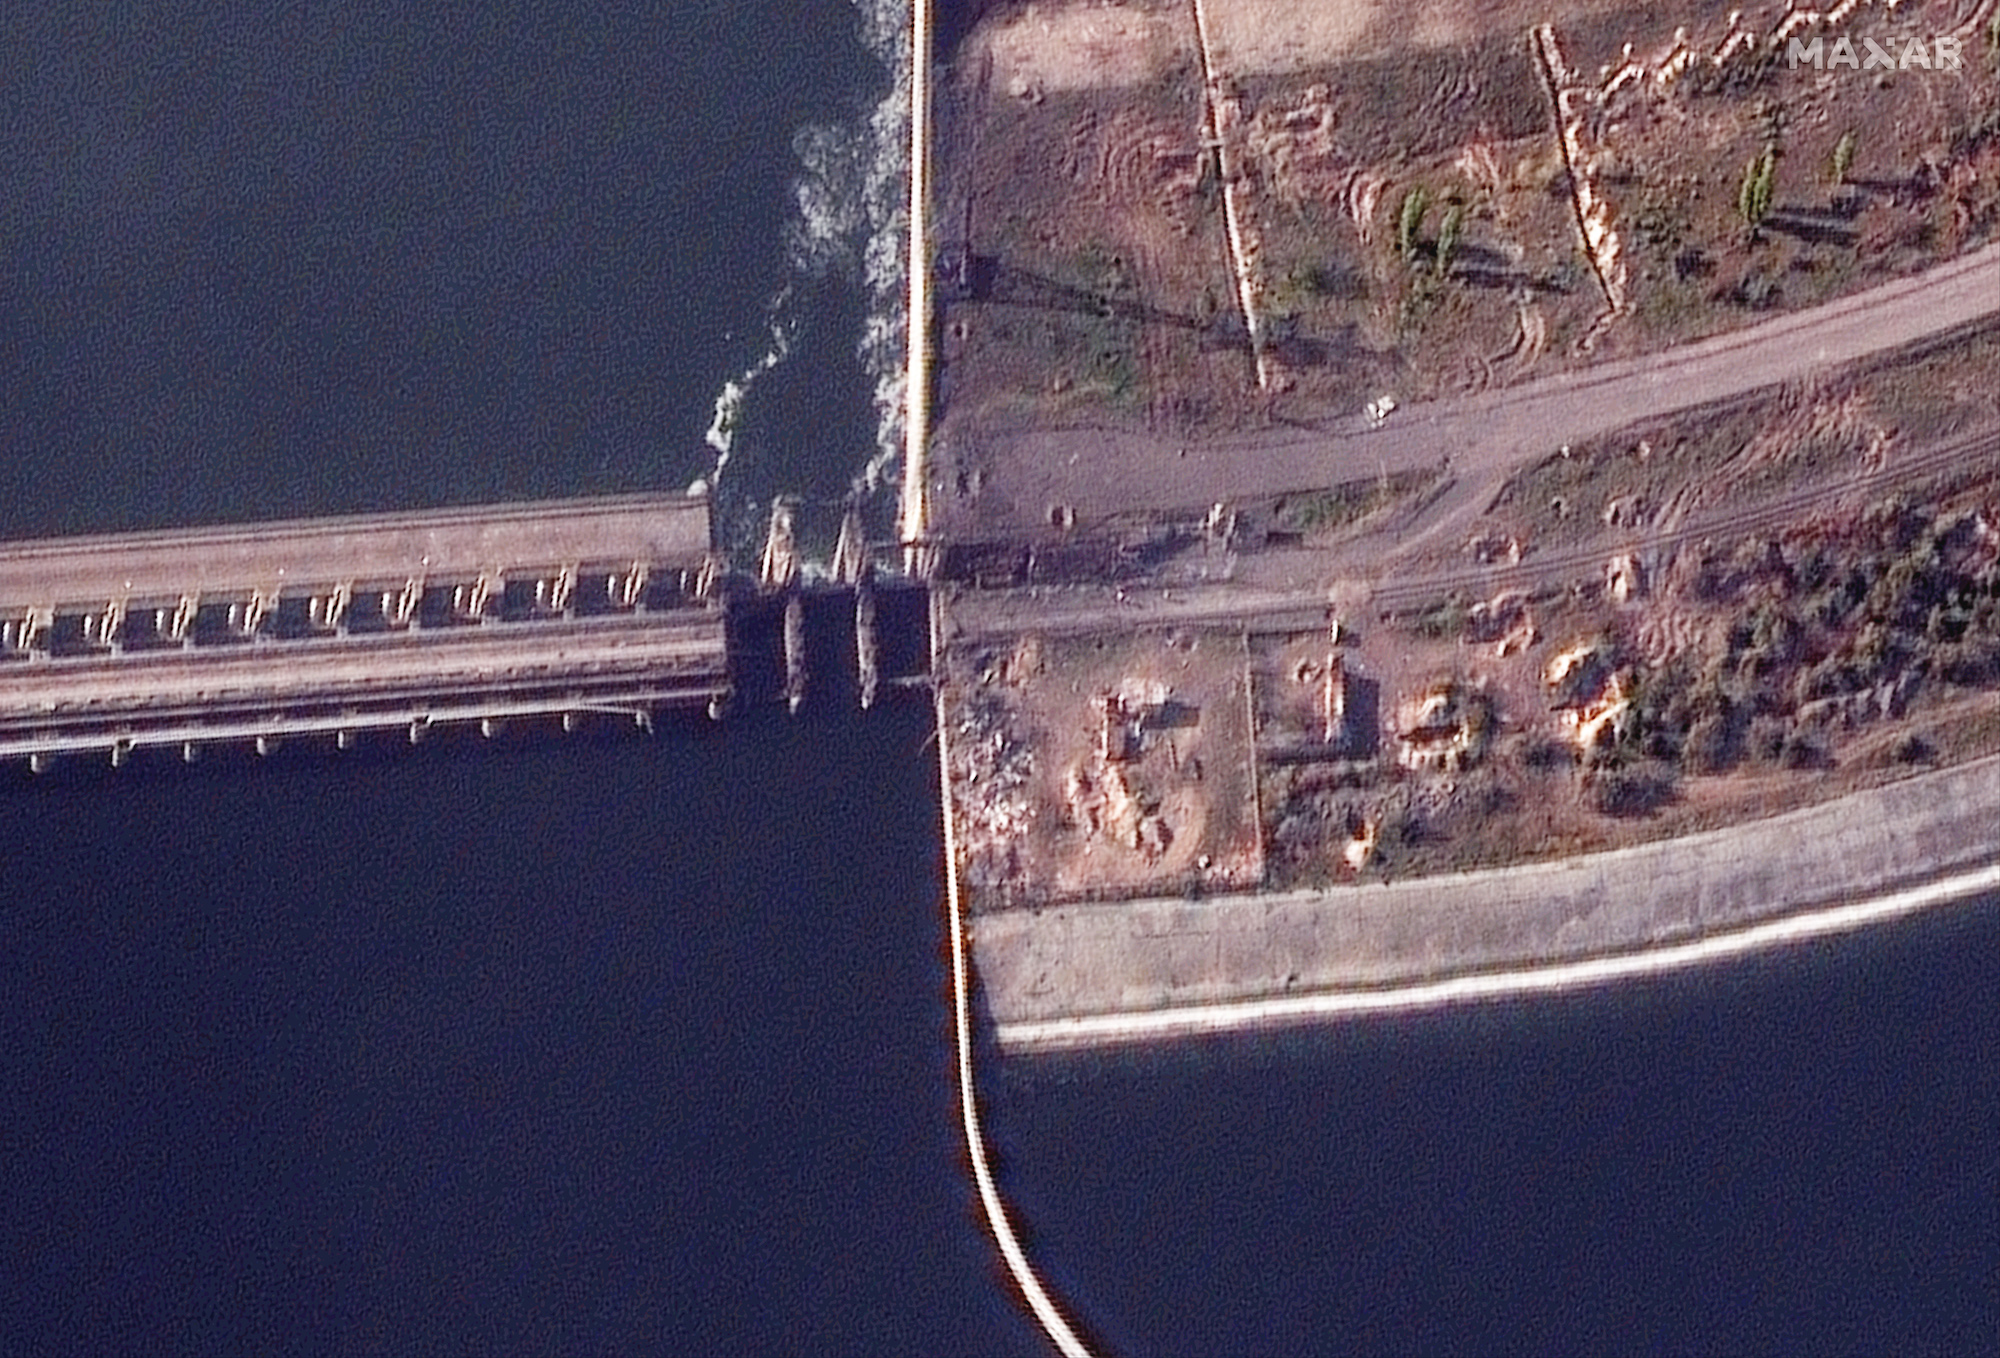 A satellite image shows the extent of damage on the Nova Kakhovka dam in the Kherson region.